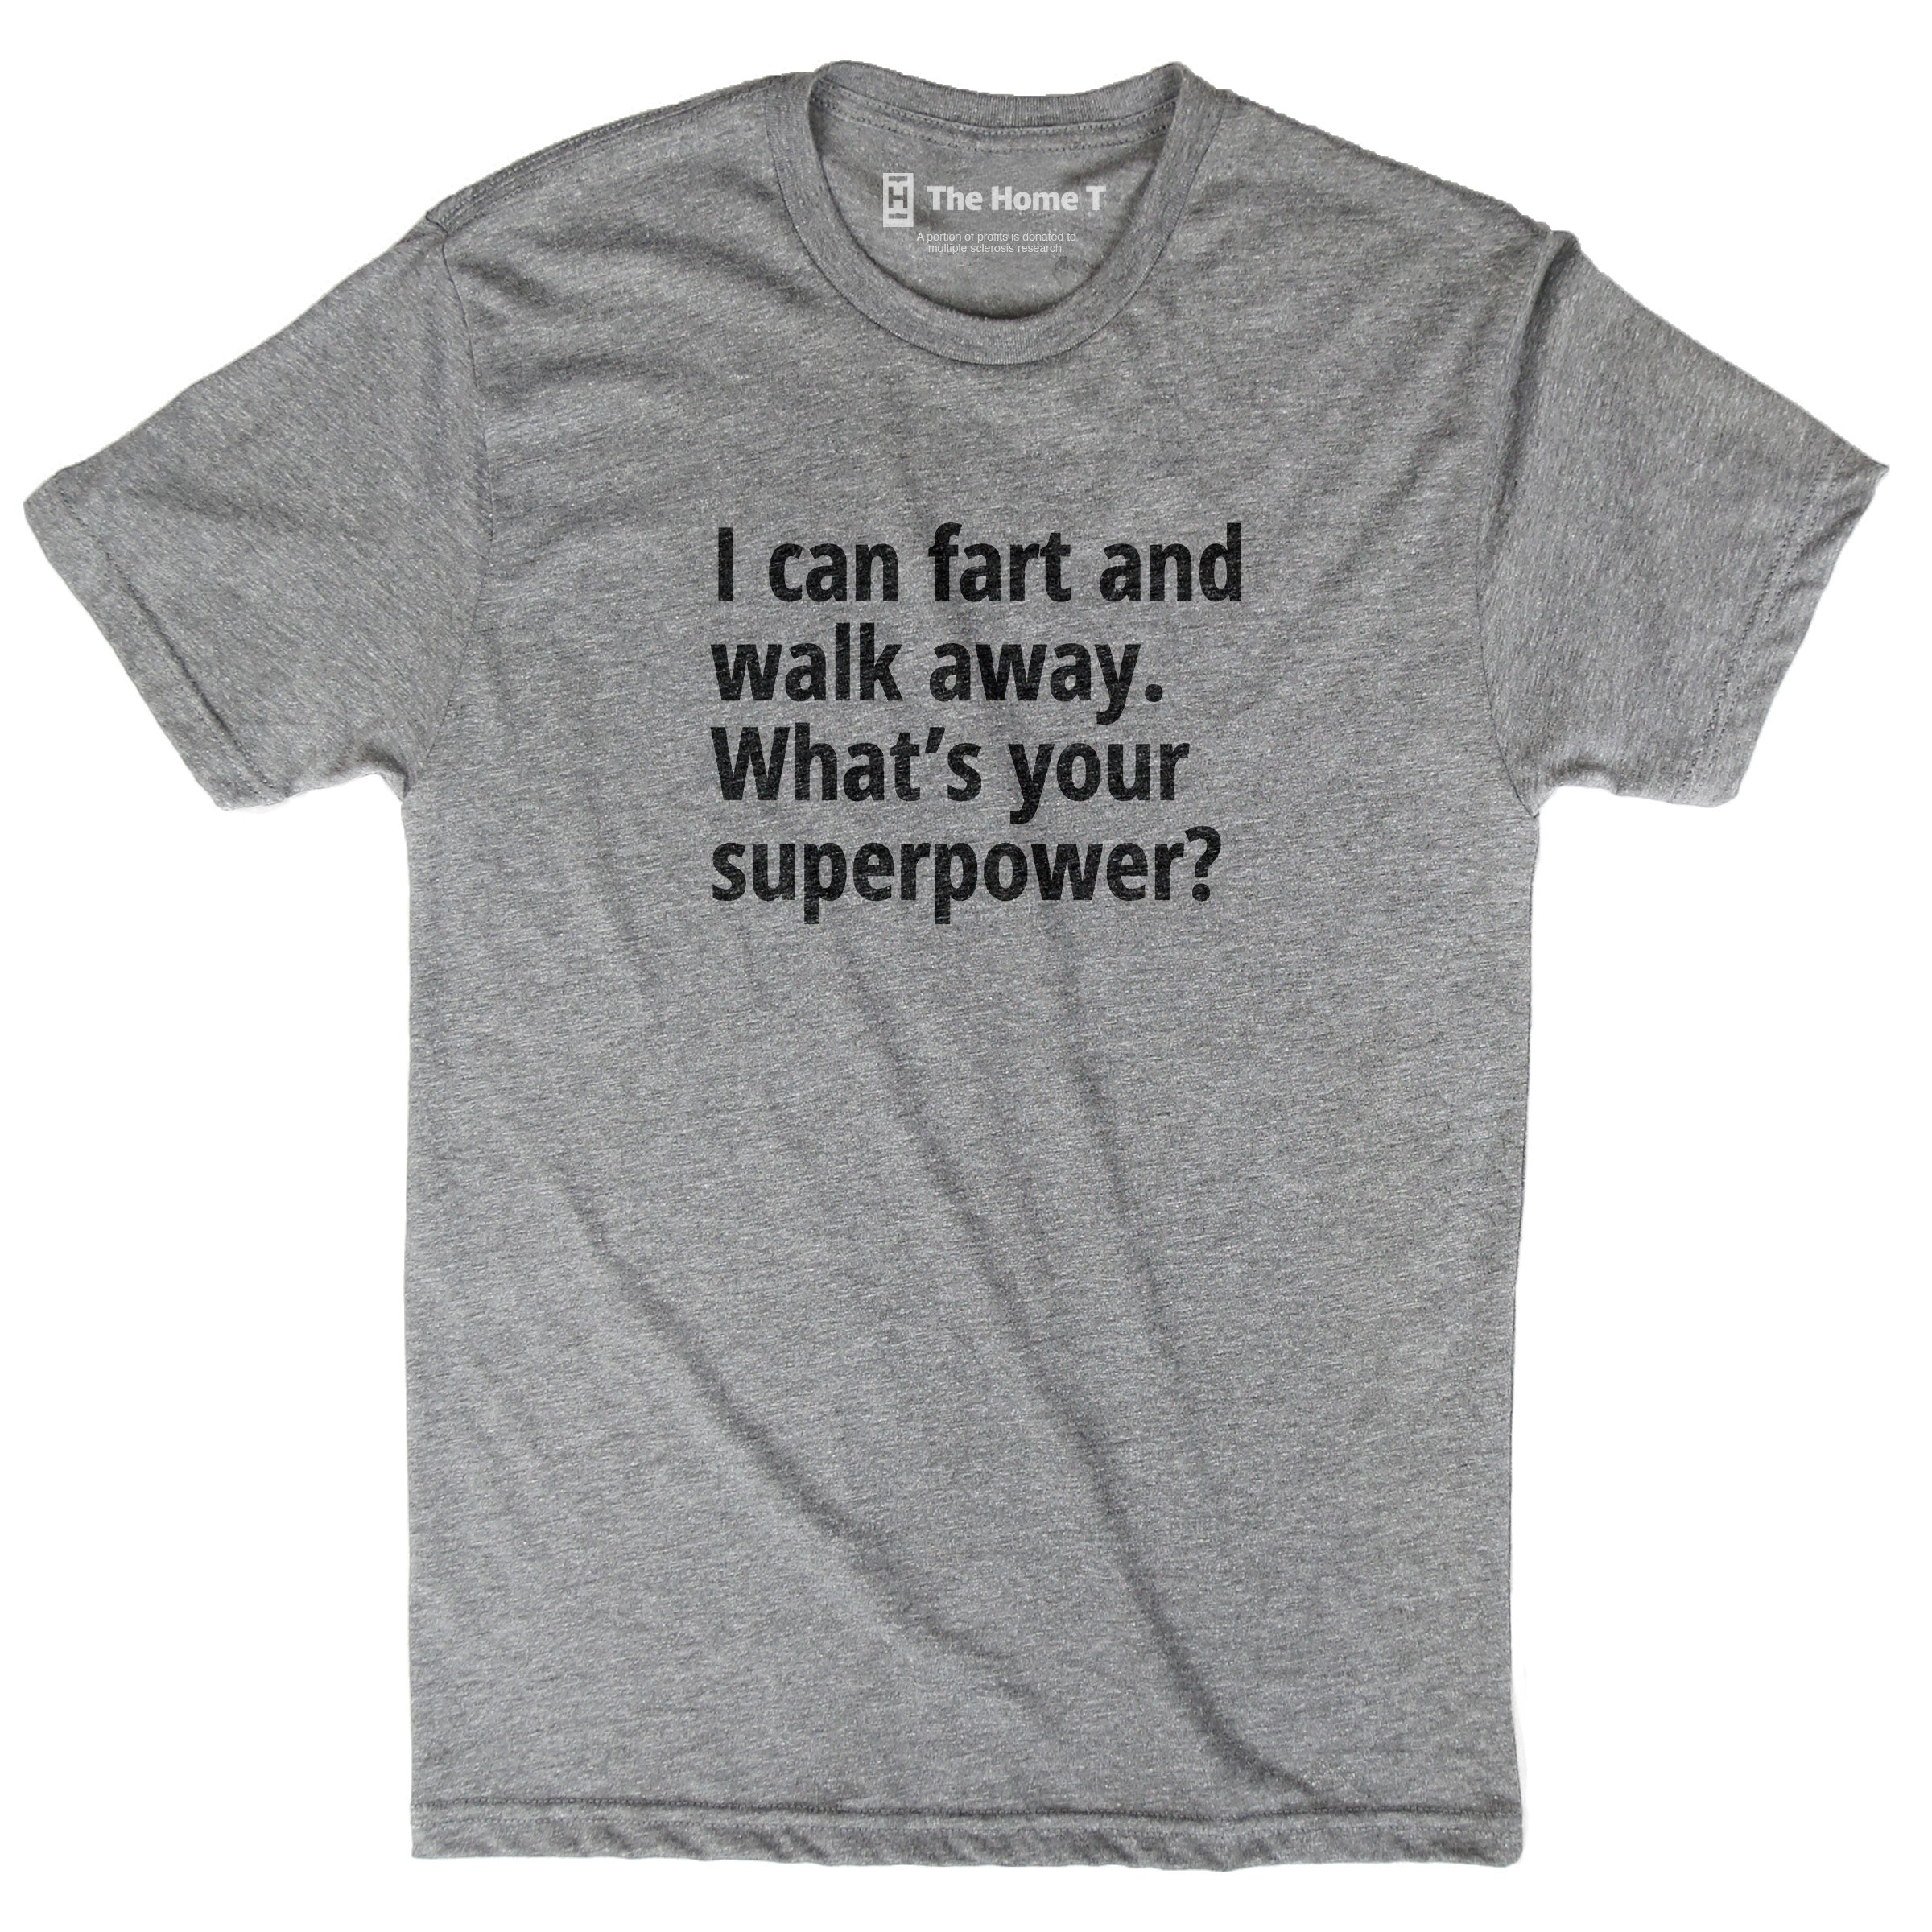 What's Your Super Power?